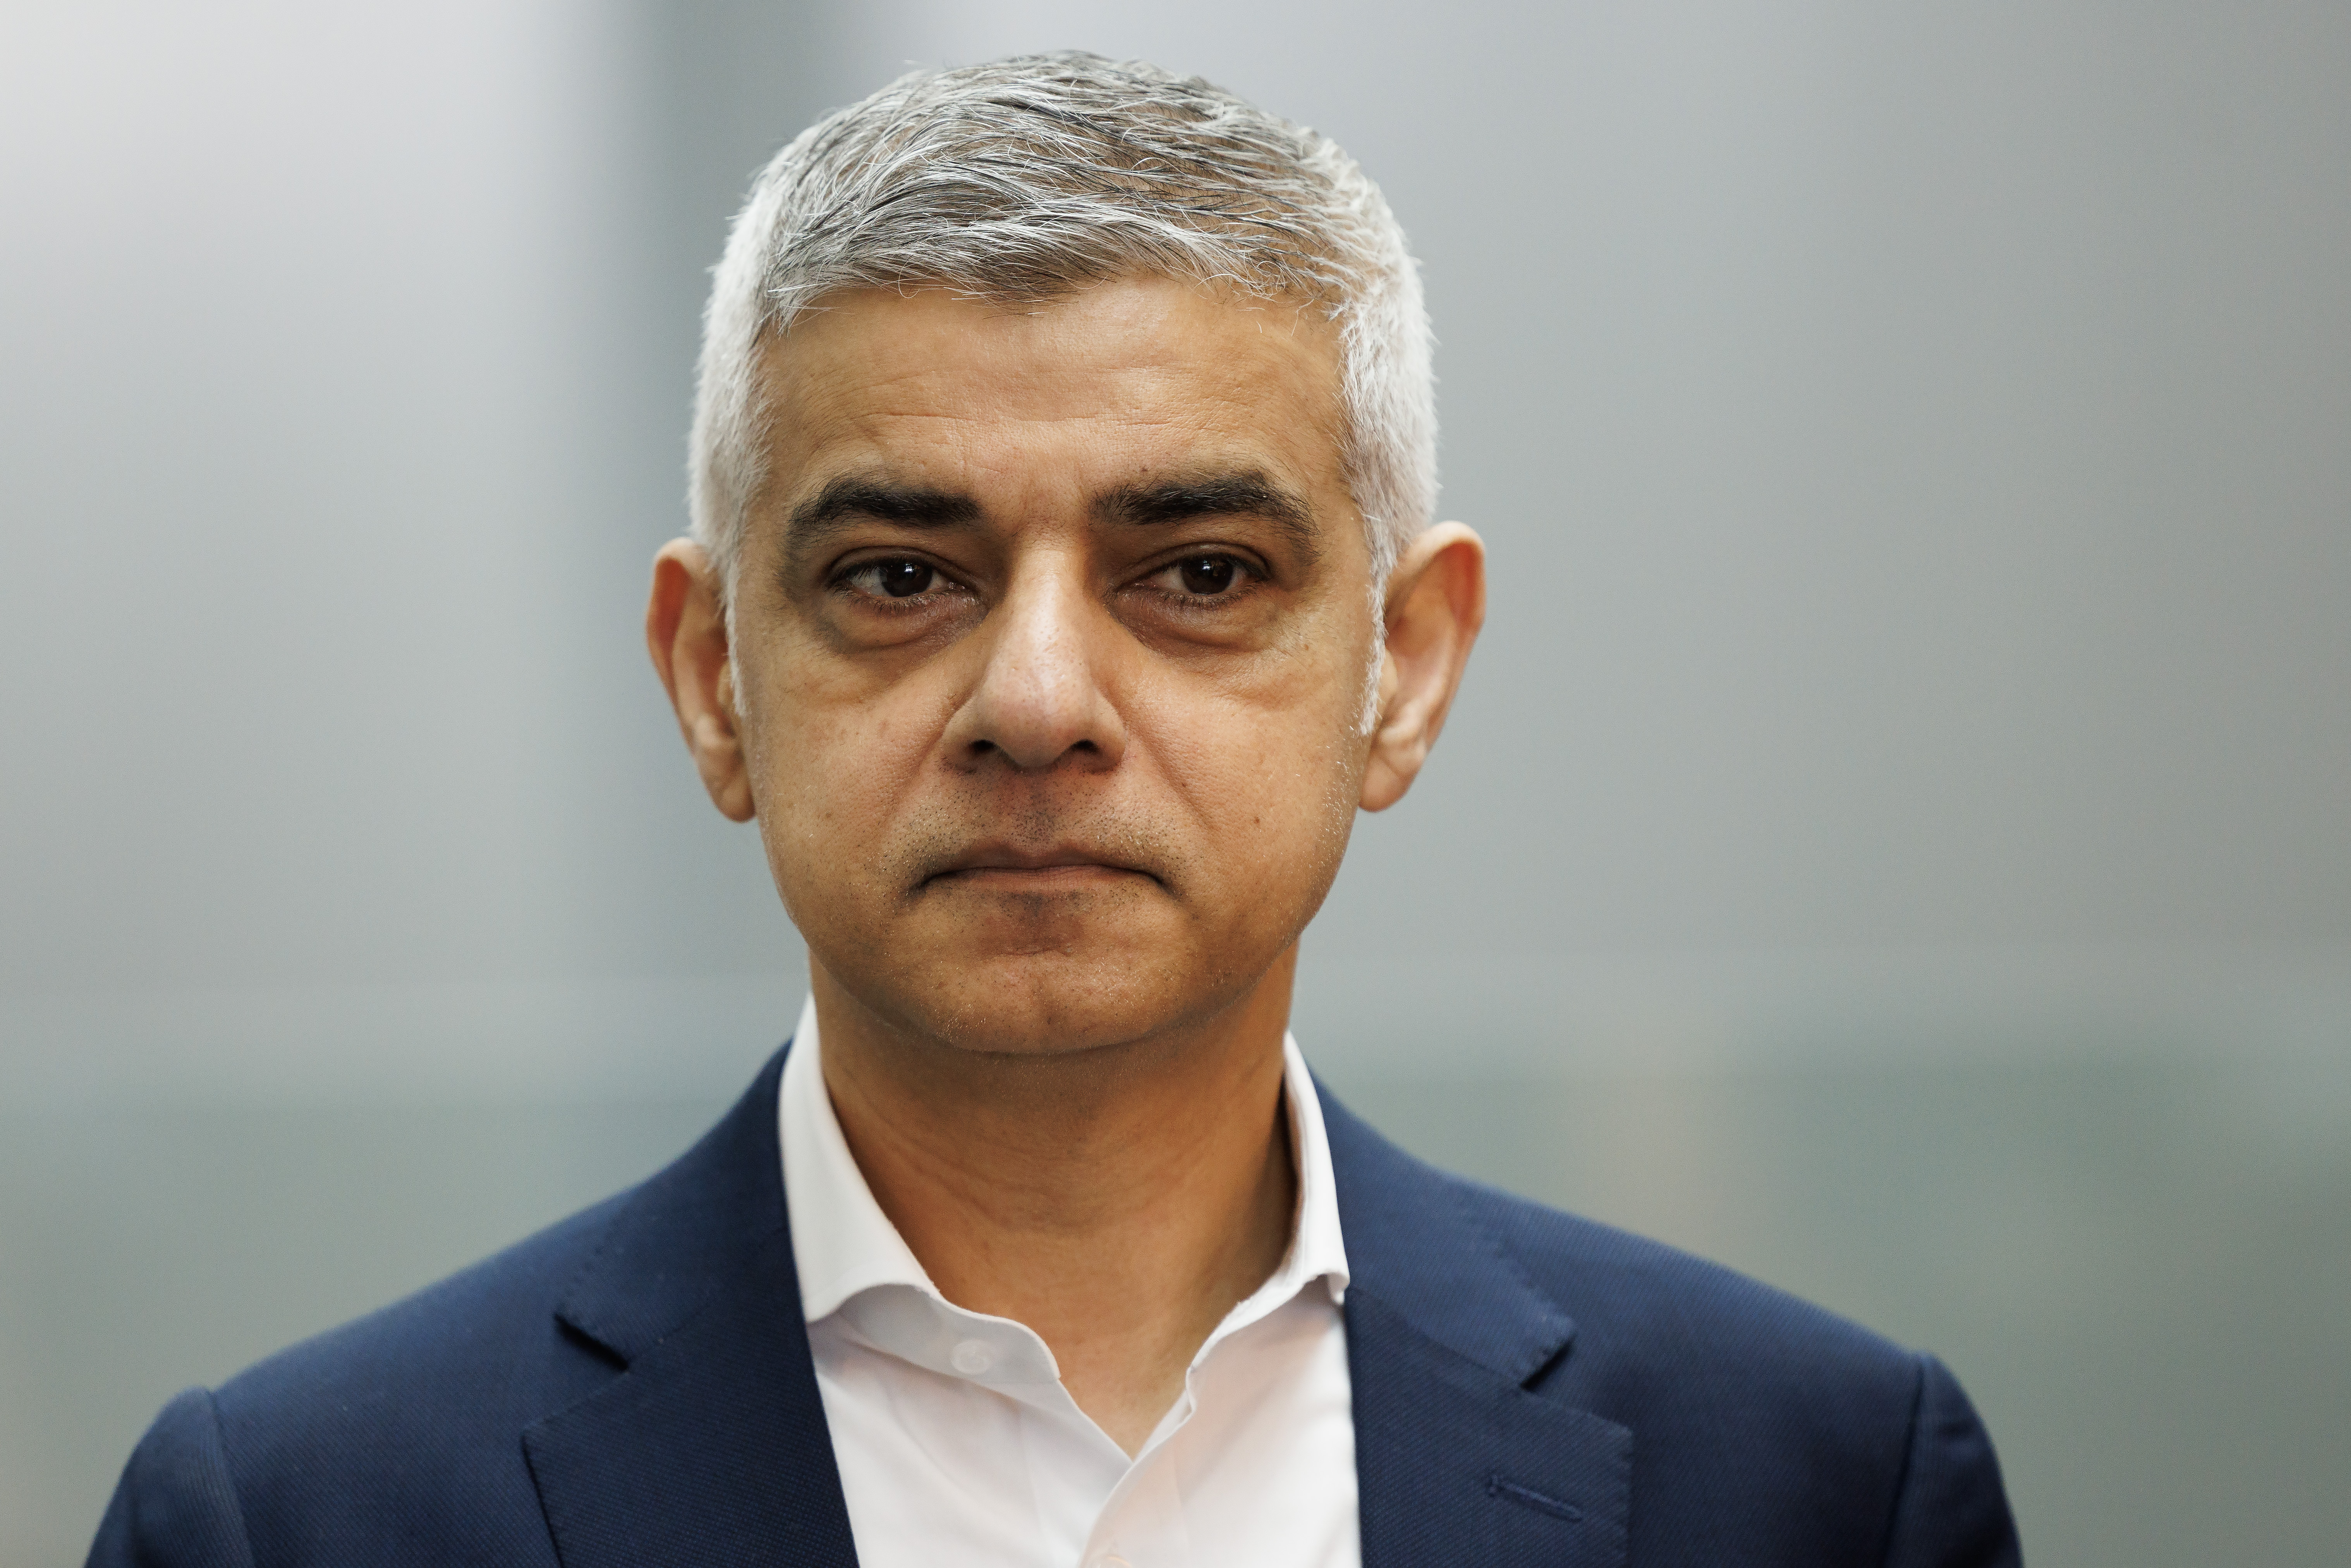 Strike action could have cost London’s economy up to £12 billion under Labour Mayor Sadiq Khan